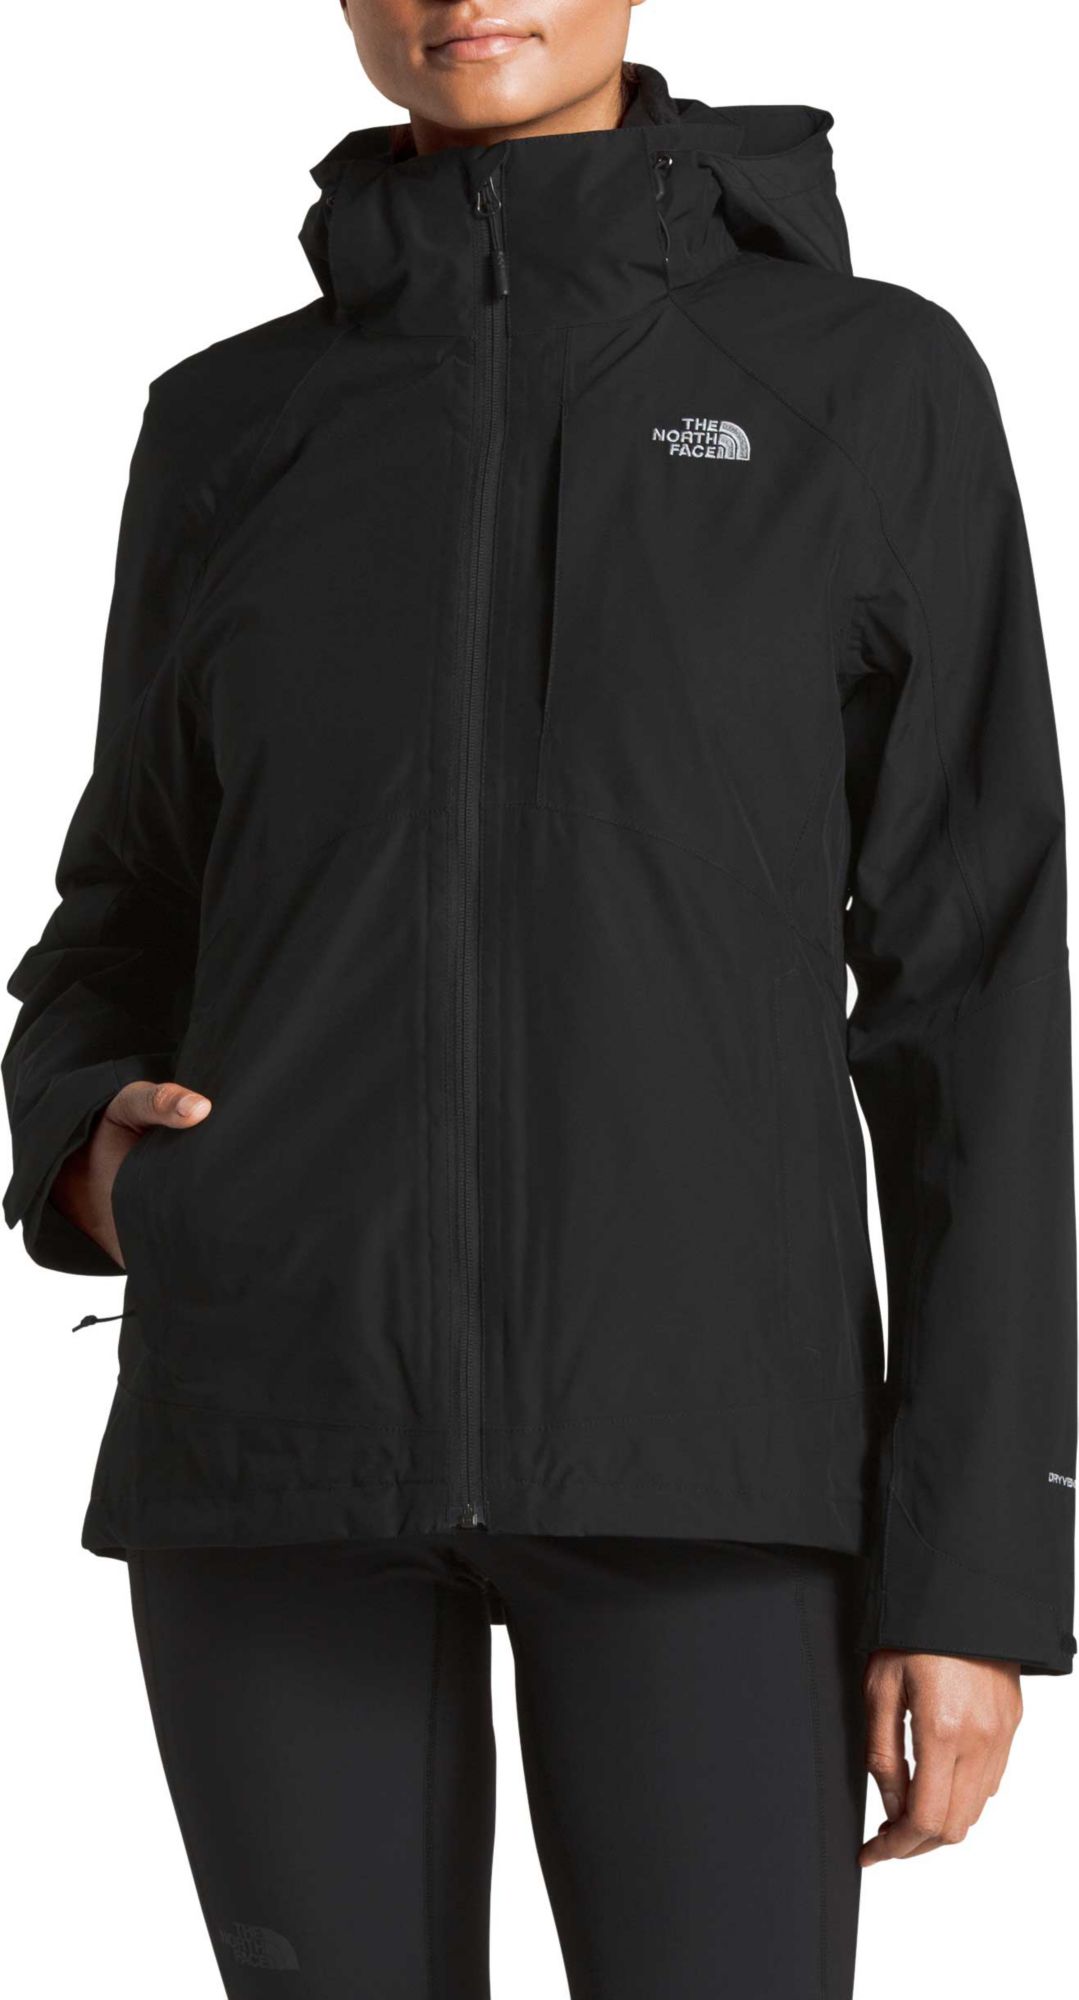 north face jacket triclimate sale